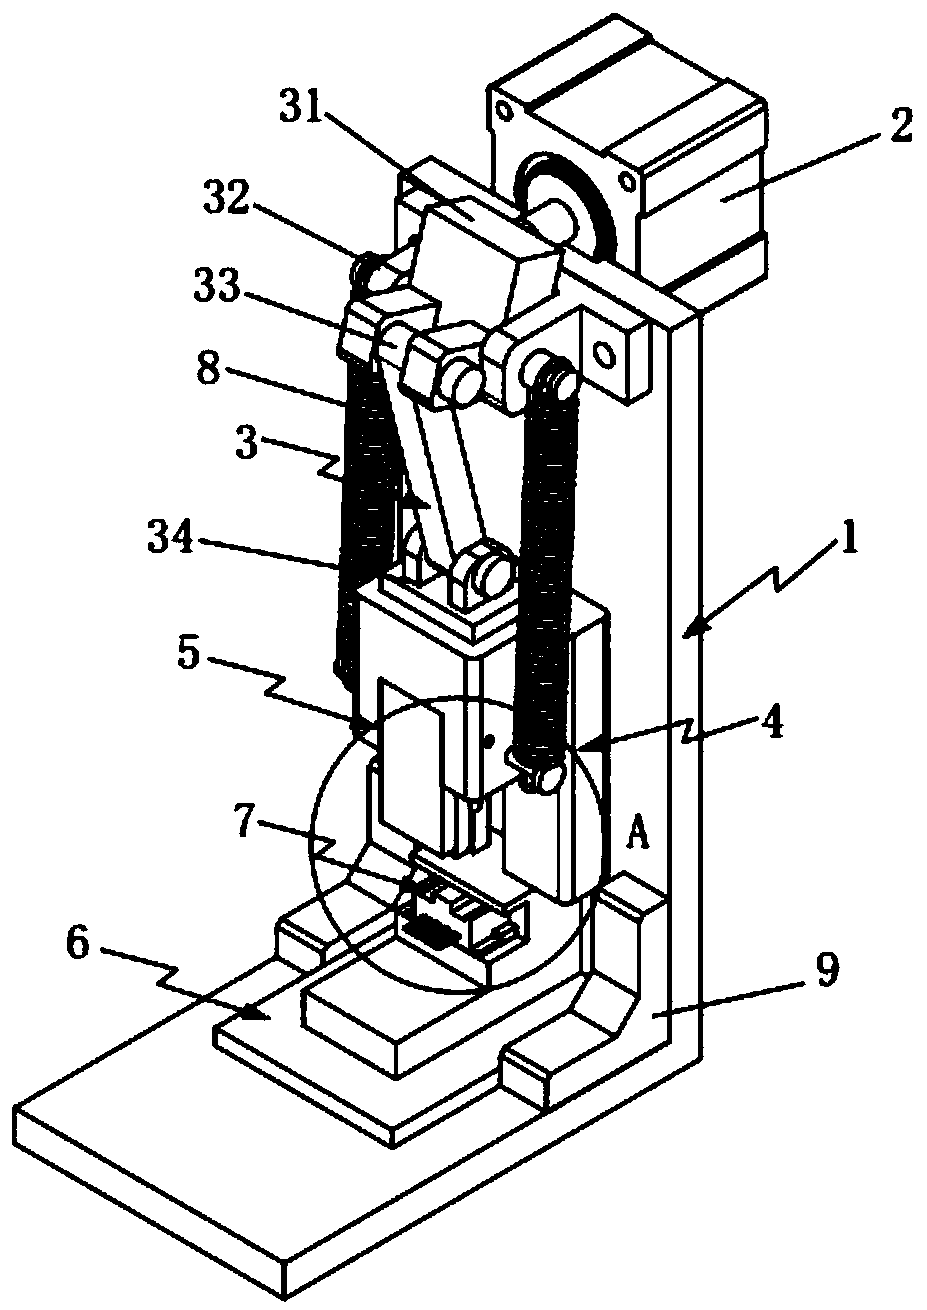 A connector pin automatic bending mechanism